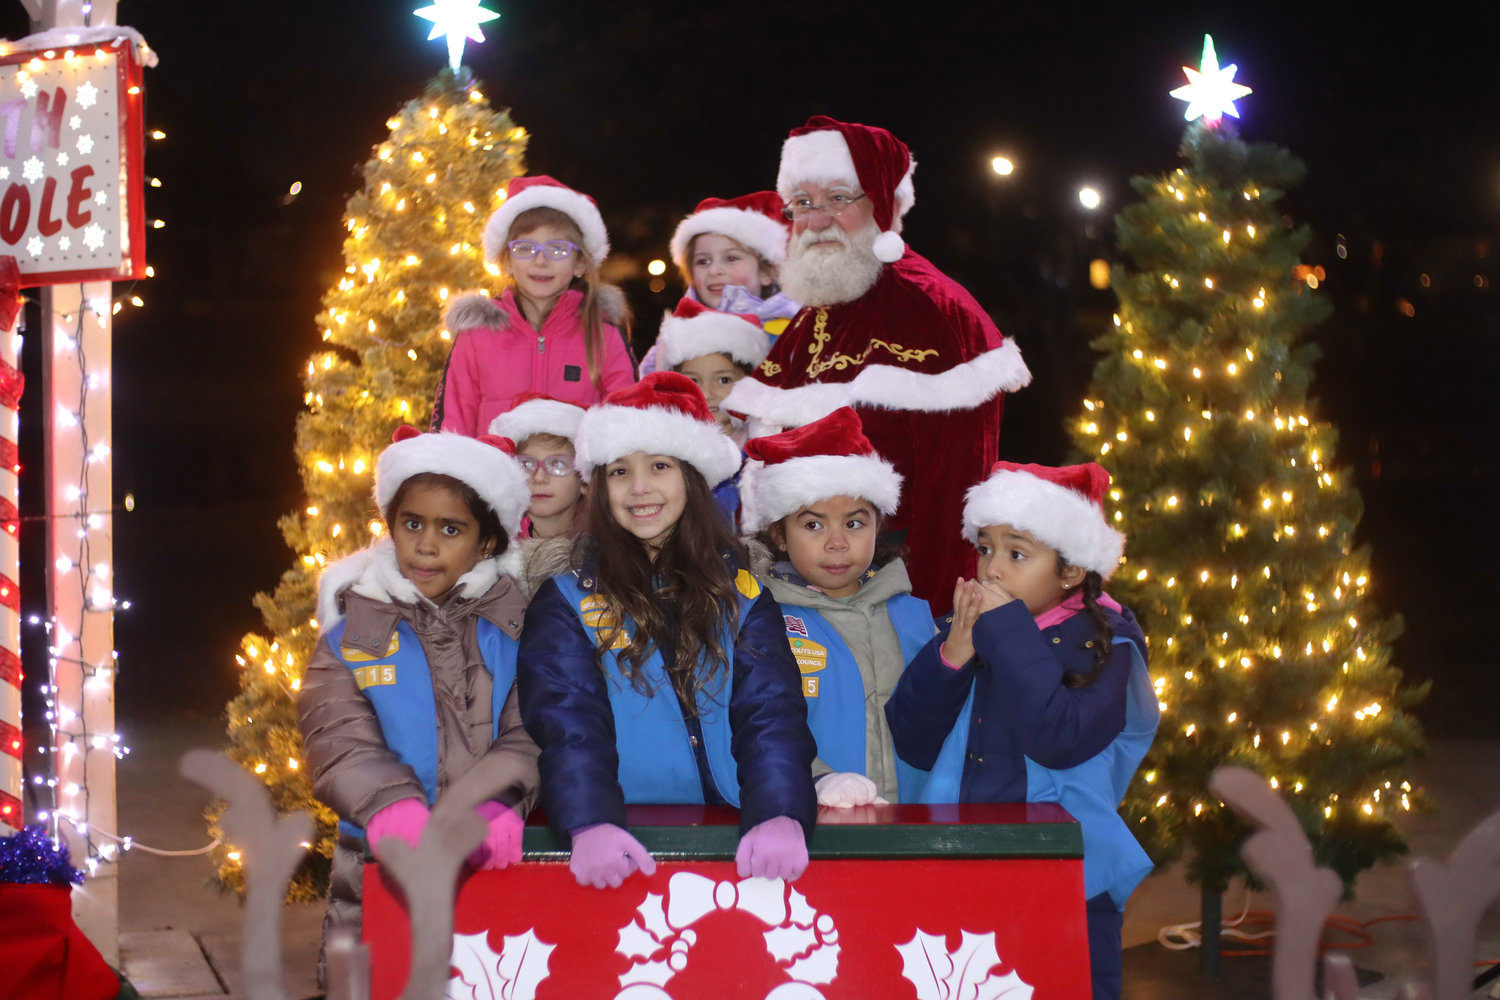 Daisy Troop 715 was able to snap a photo with Santa on his sled after greeting him with a Christmas song.